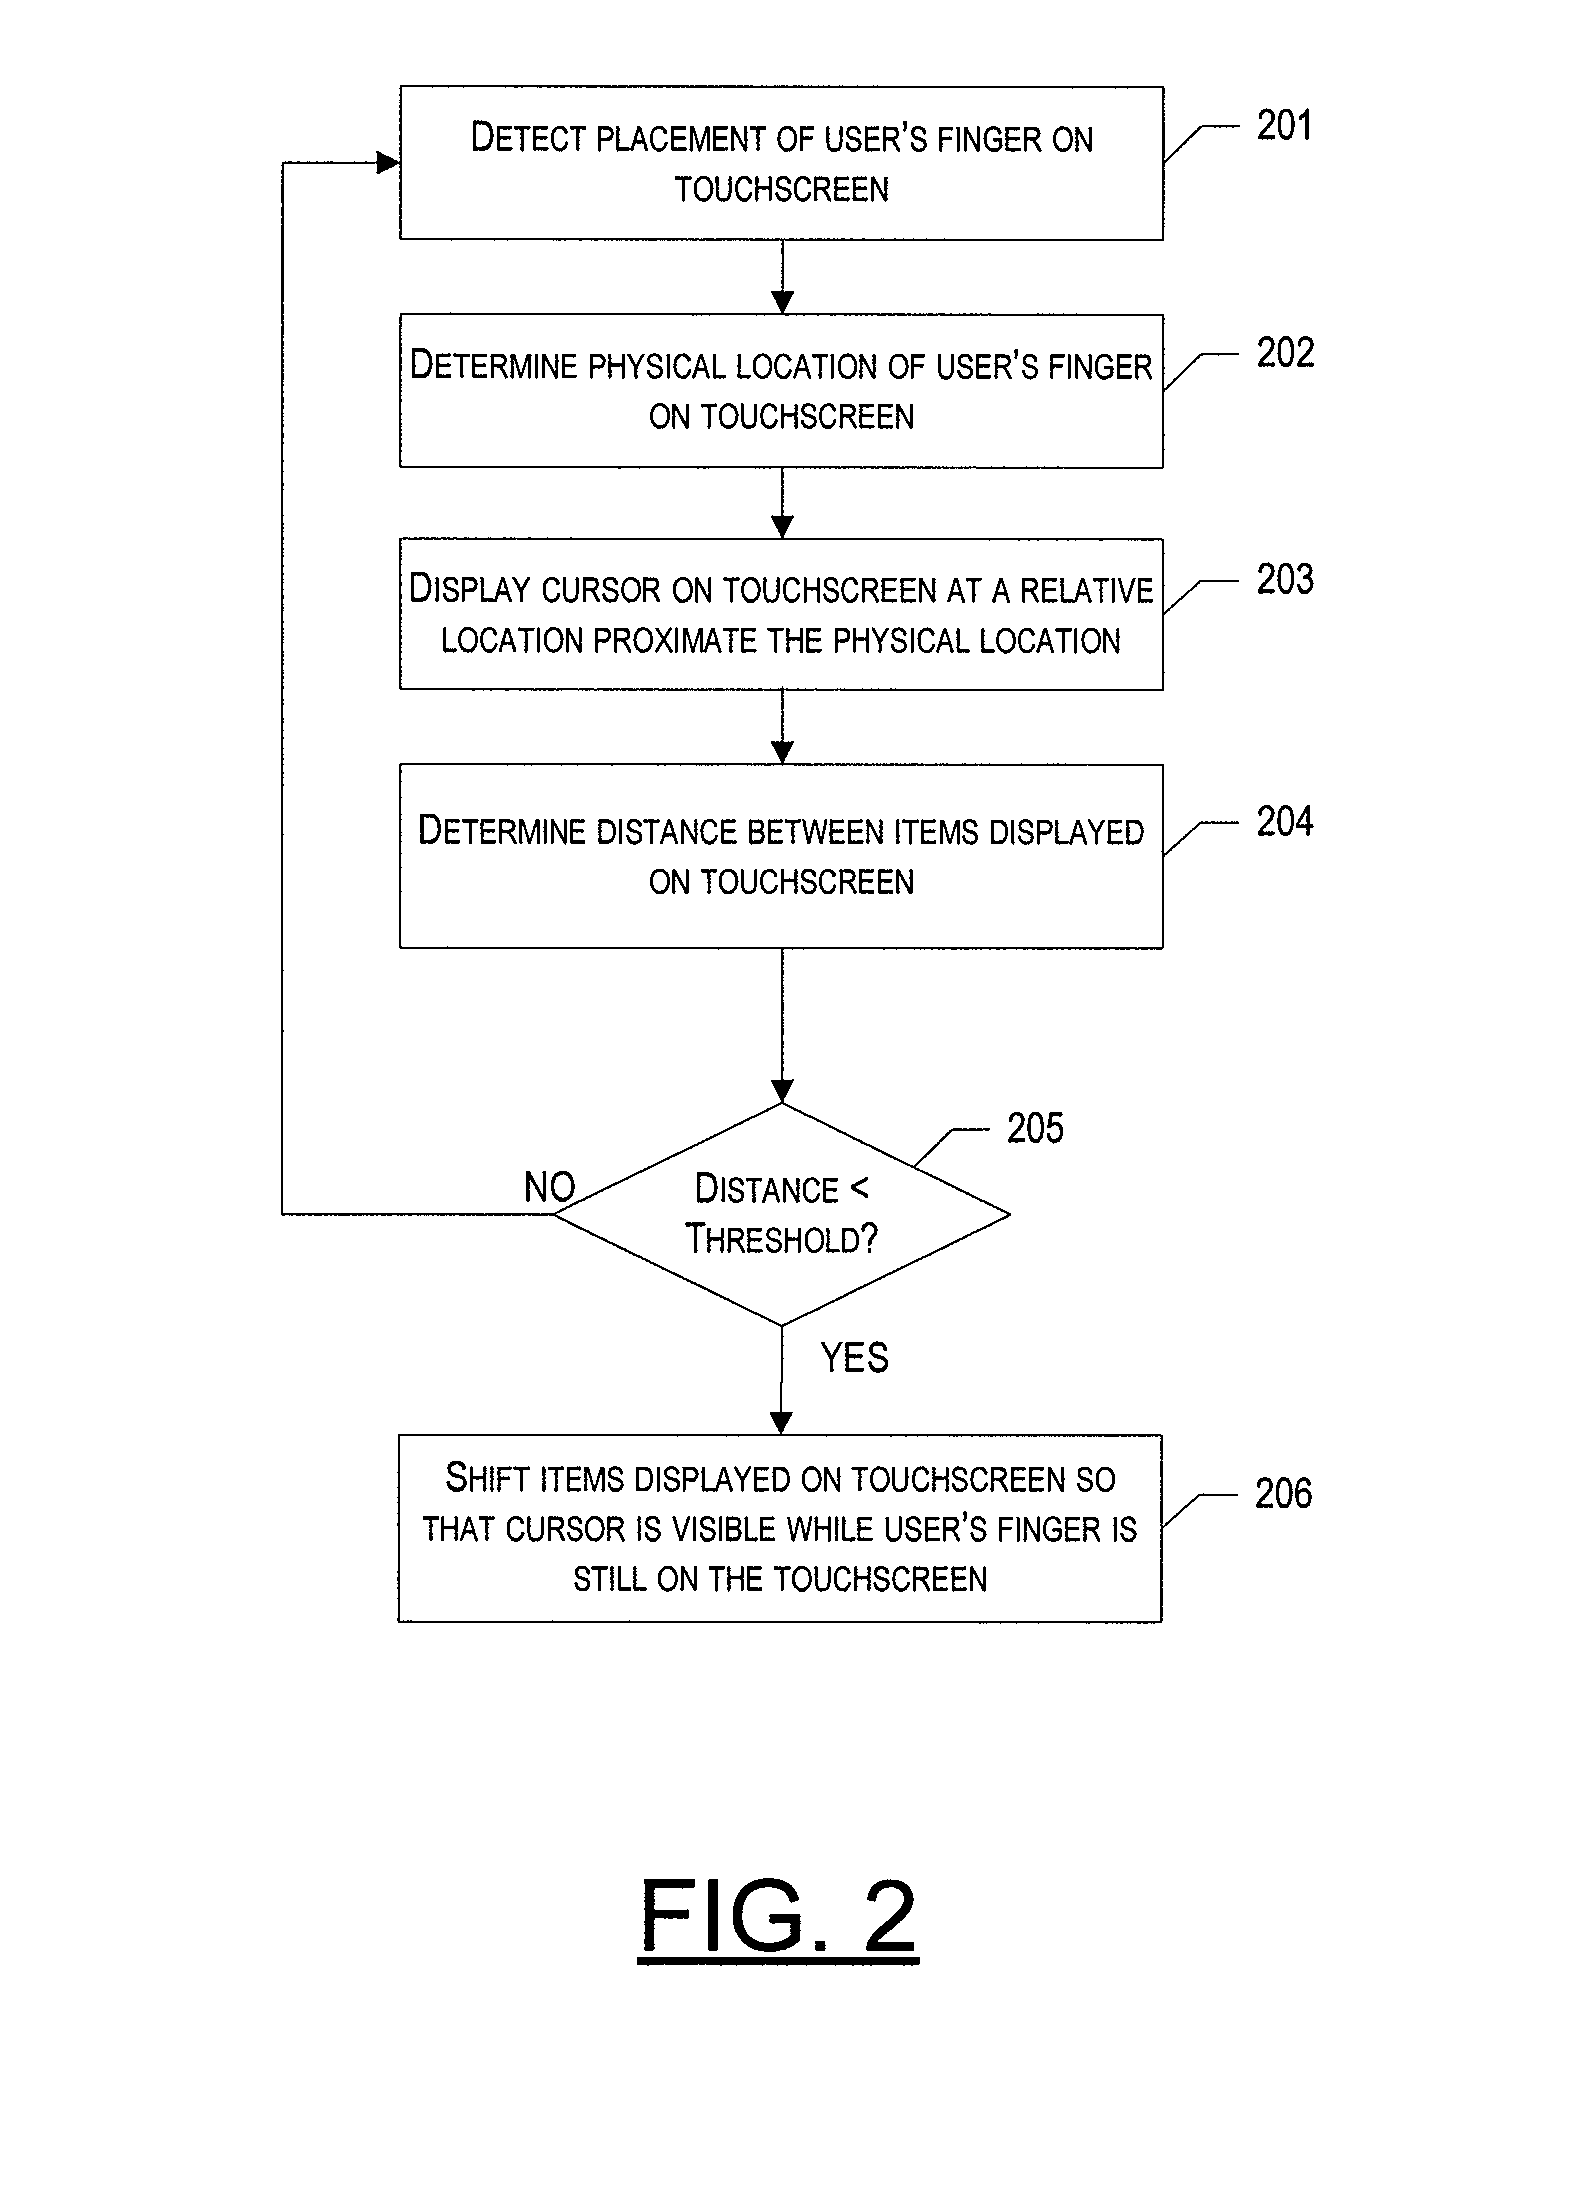 Method, apparatus and computer program product for facilitating data entry via a touchscreen